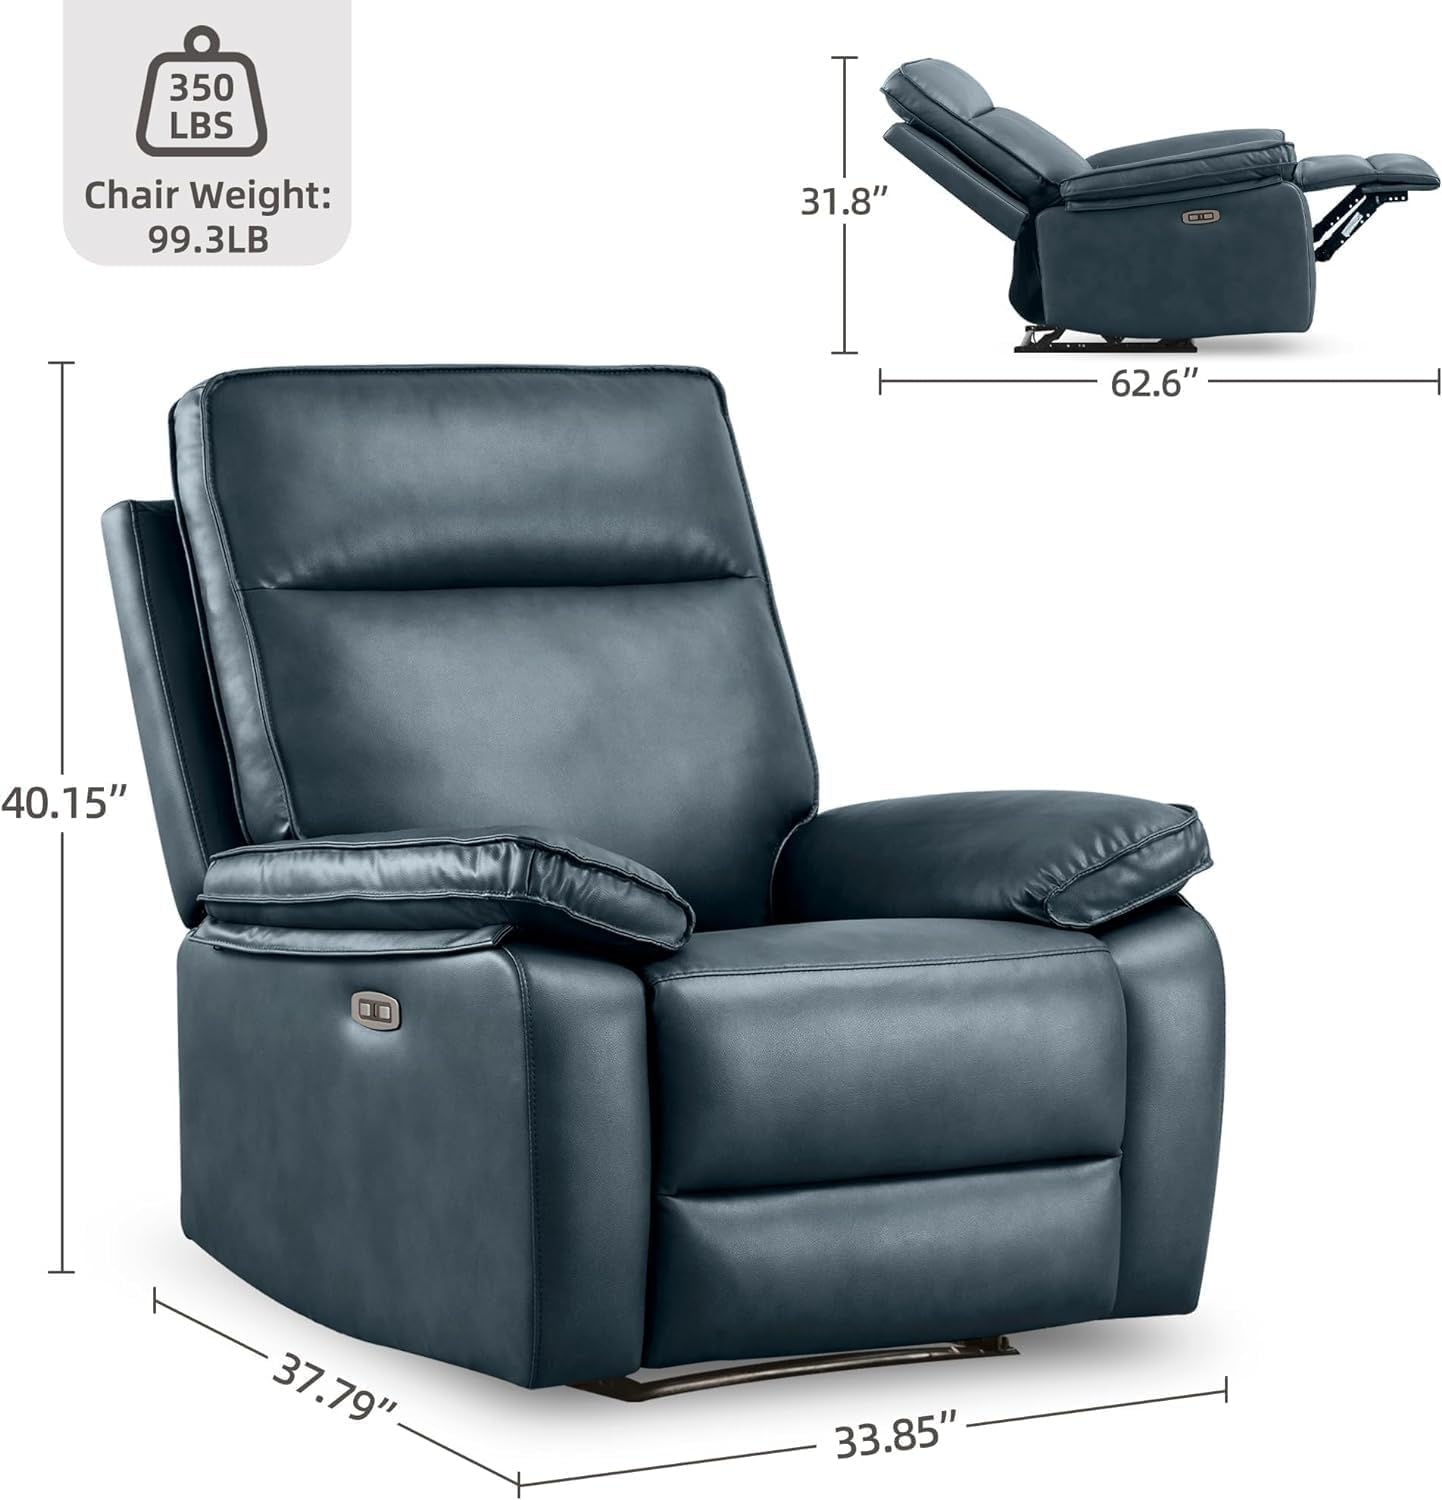 Electric Power Recliner Chair with USB Port, Leather Rocker Recliner Chairs for Adults, High Back Modern Single Sofa Home Theater Seat for Living Room, Dark Blue